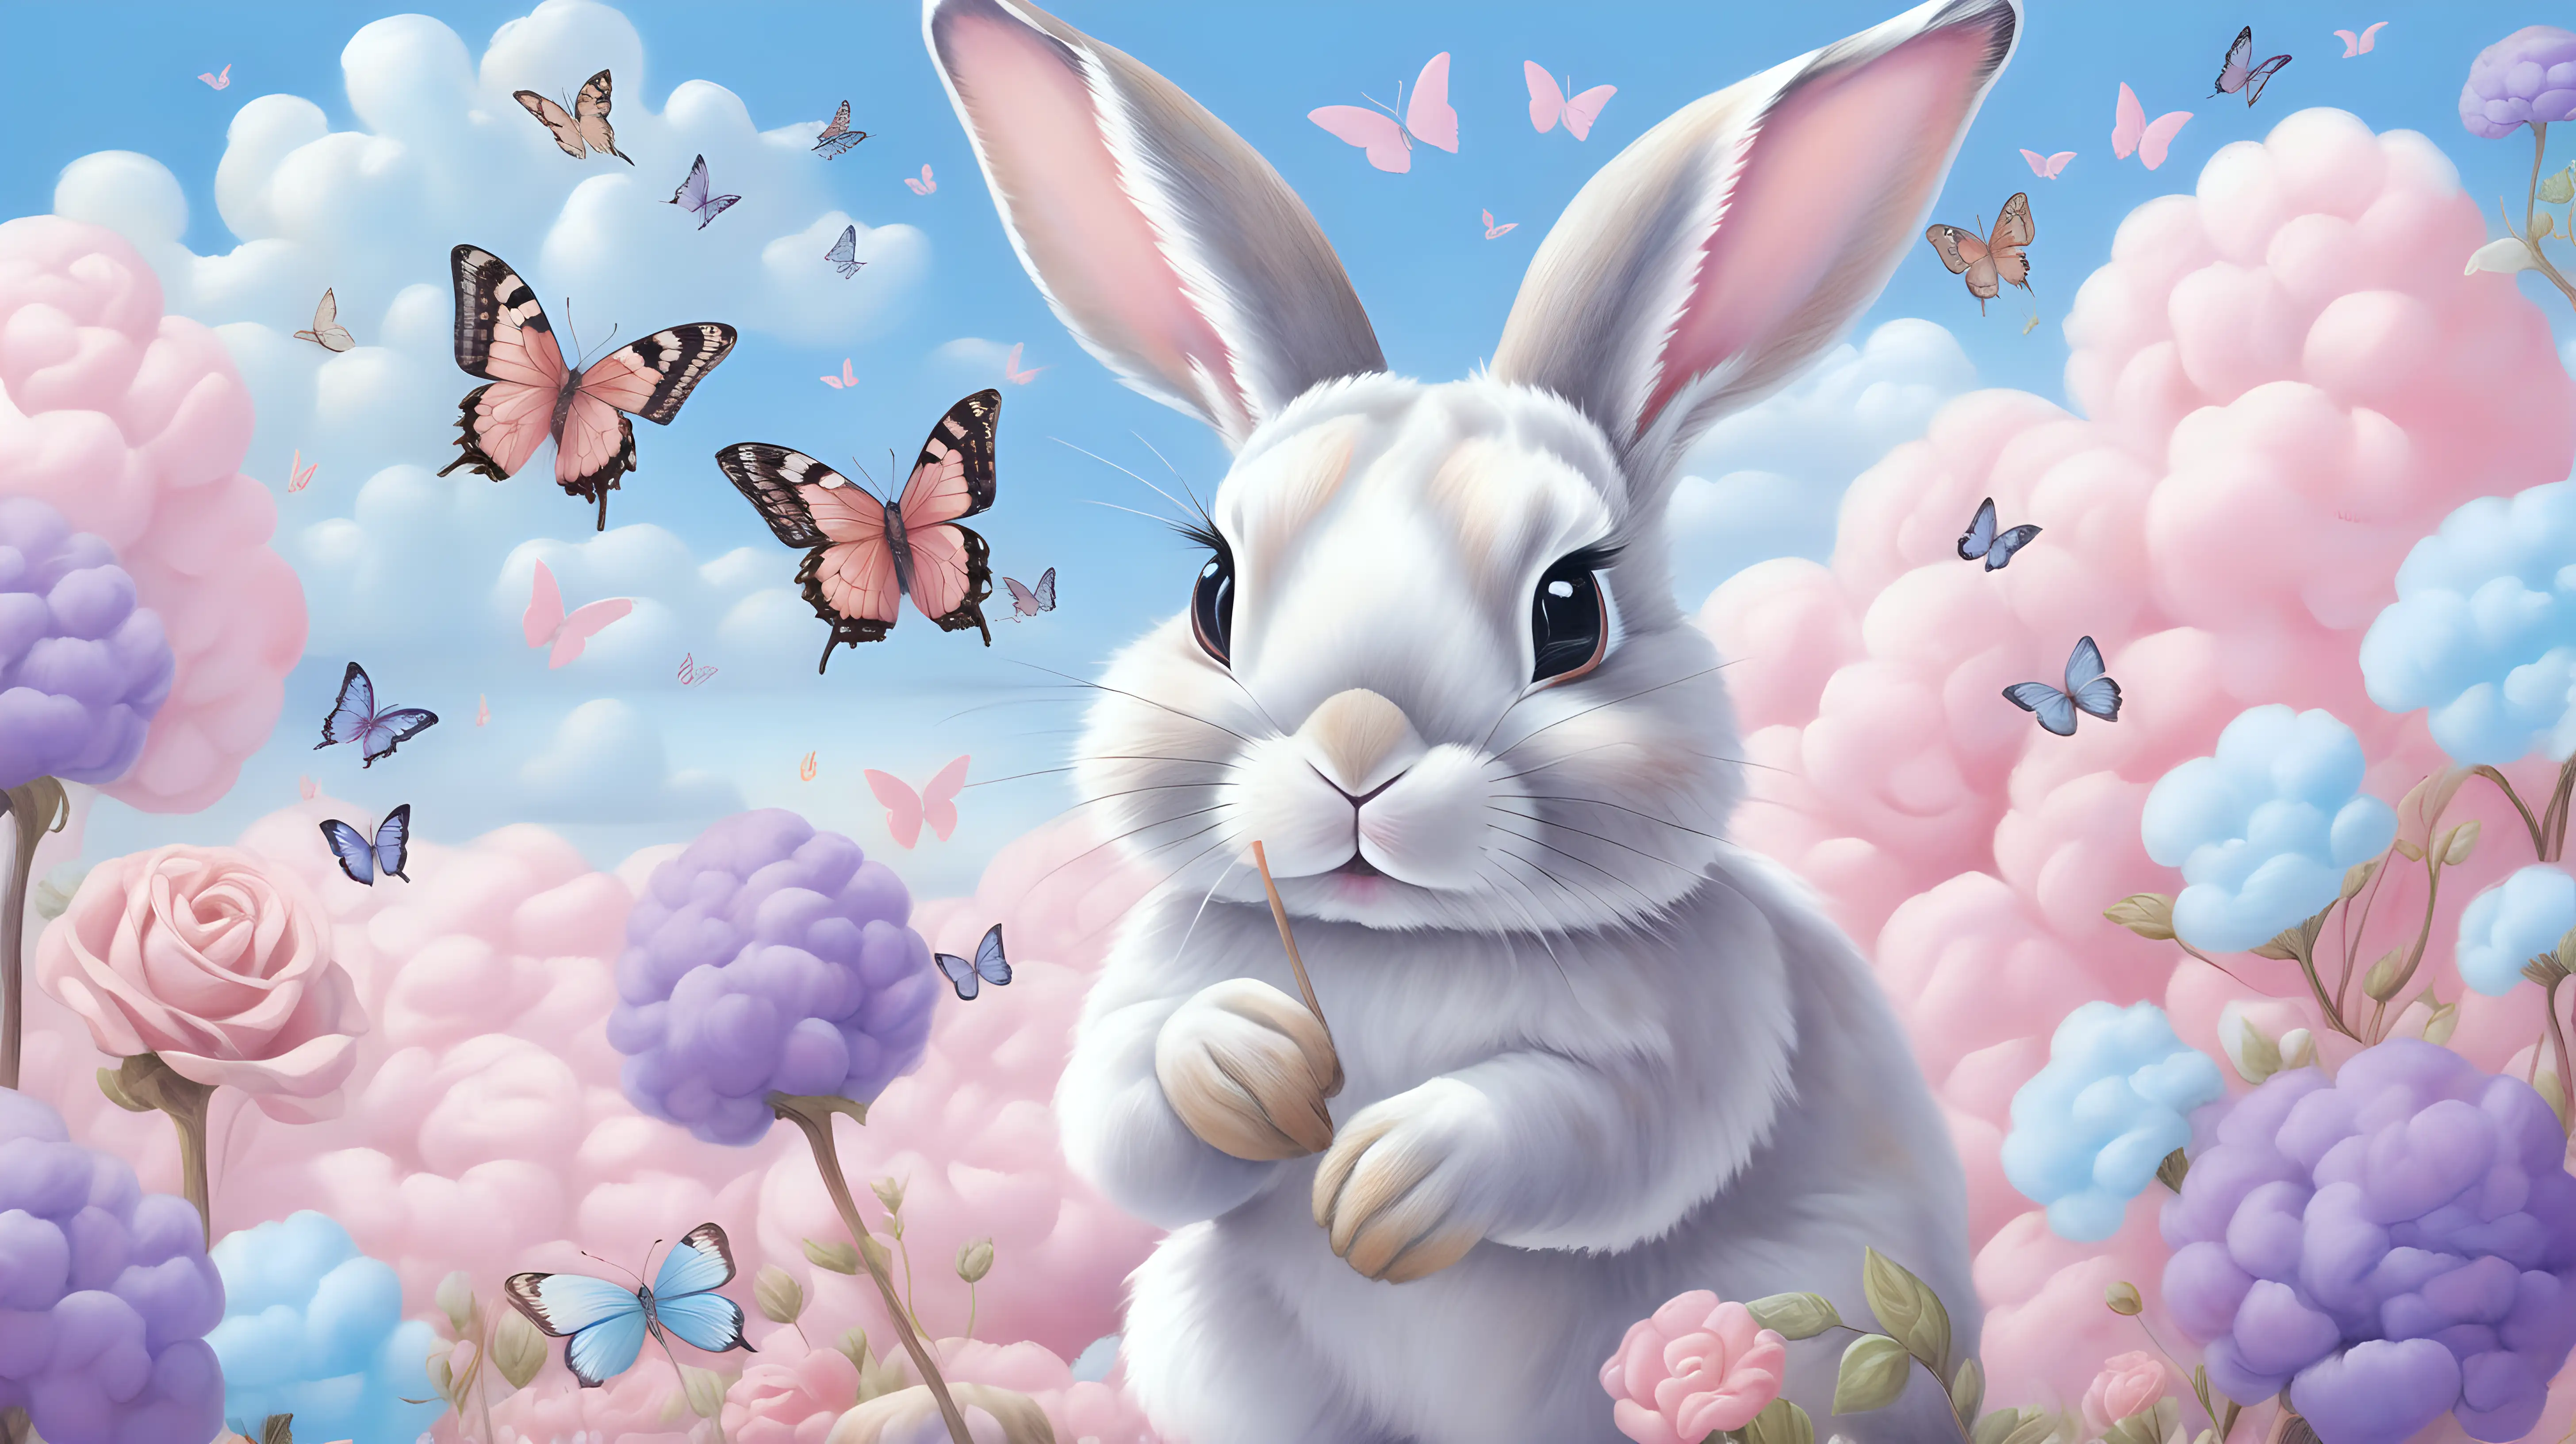 Whimsical Rabbit Surrounded by Pastel Cotton Candy Flowers and Butterflies